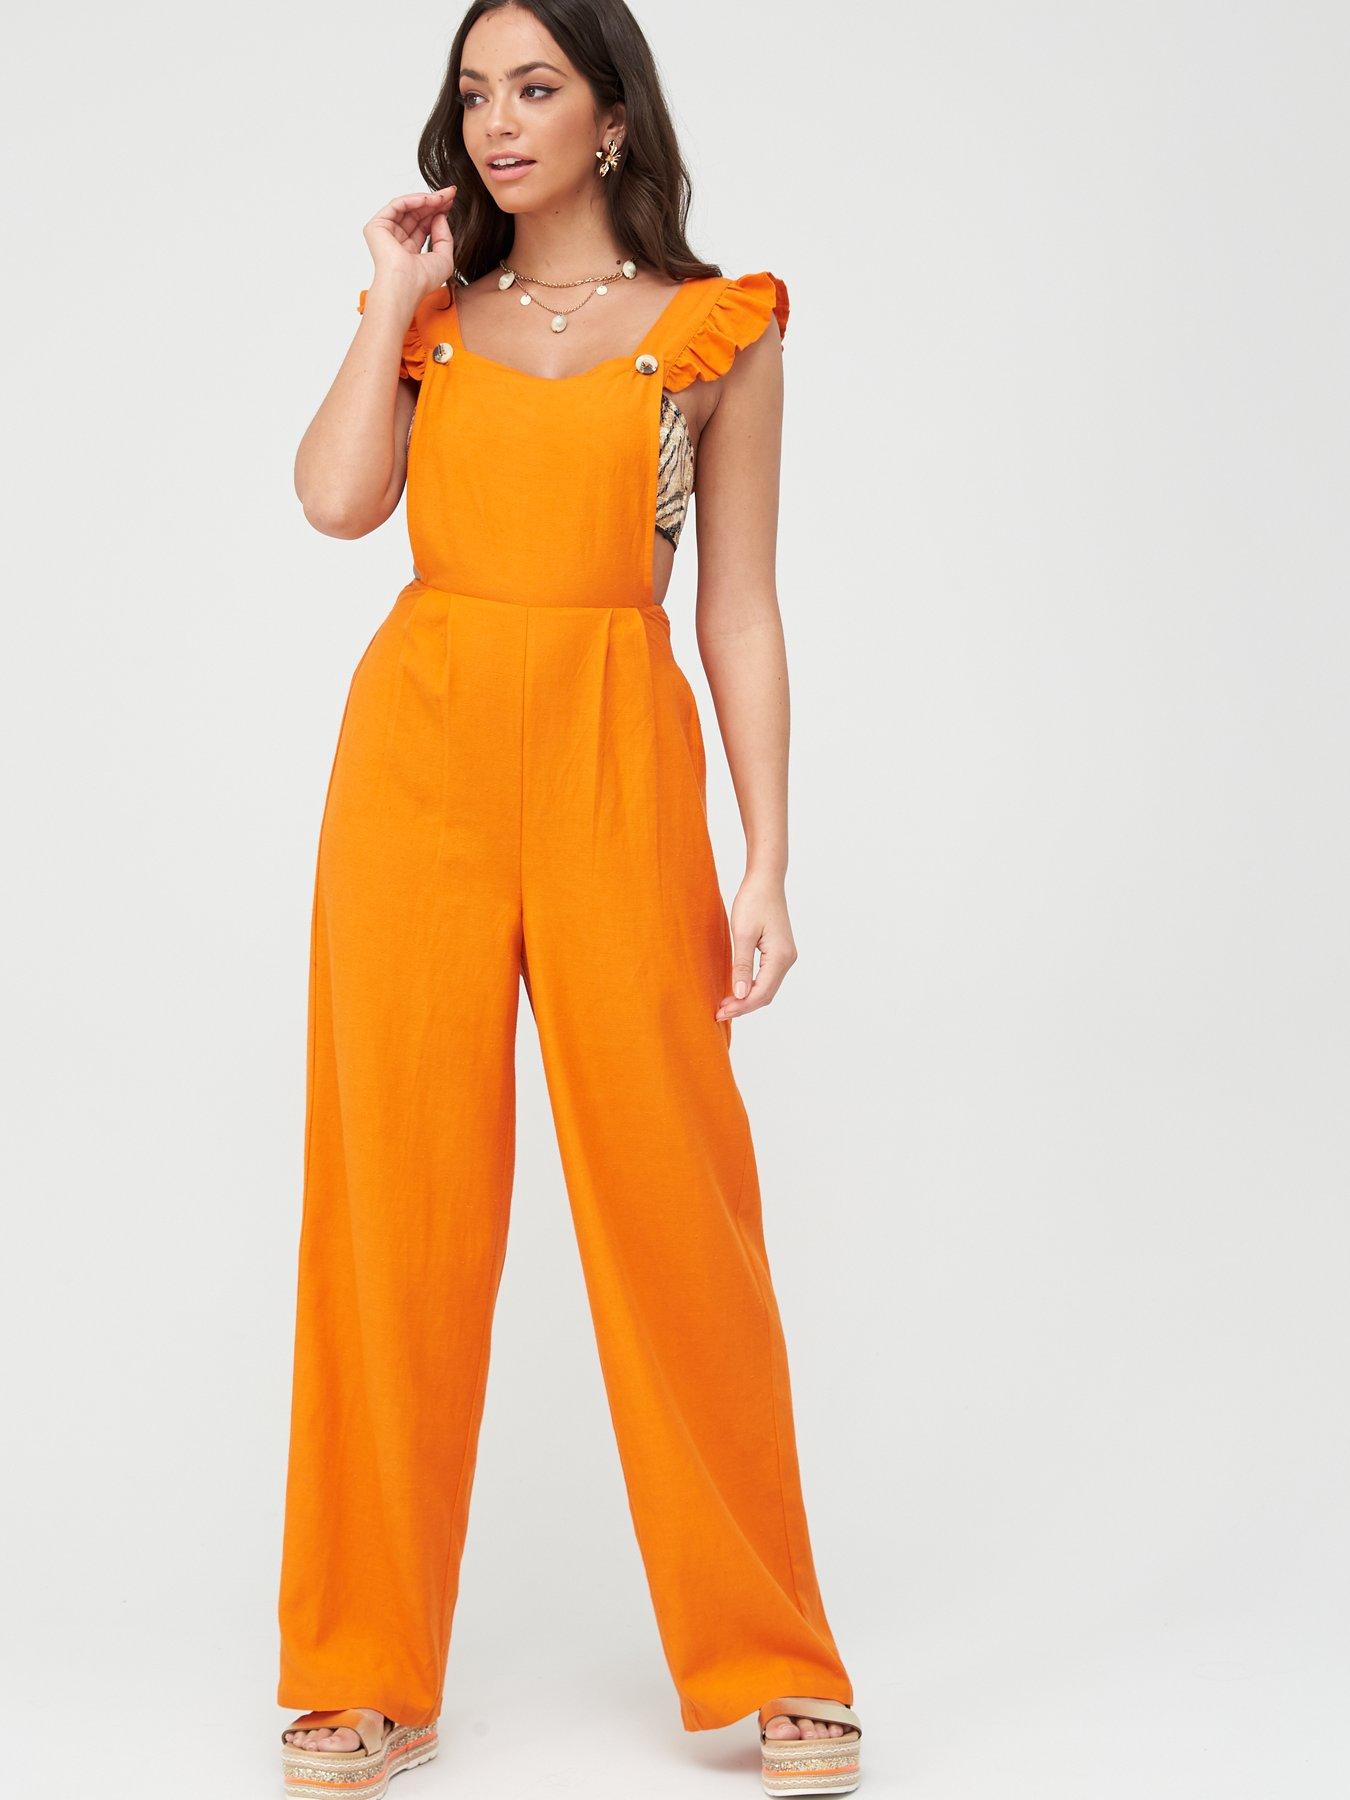 fitted jumpsuits uk